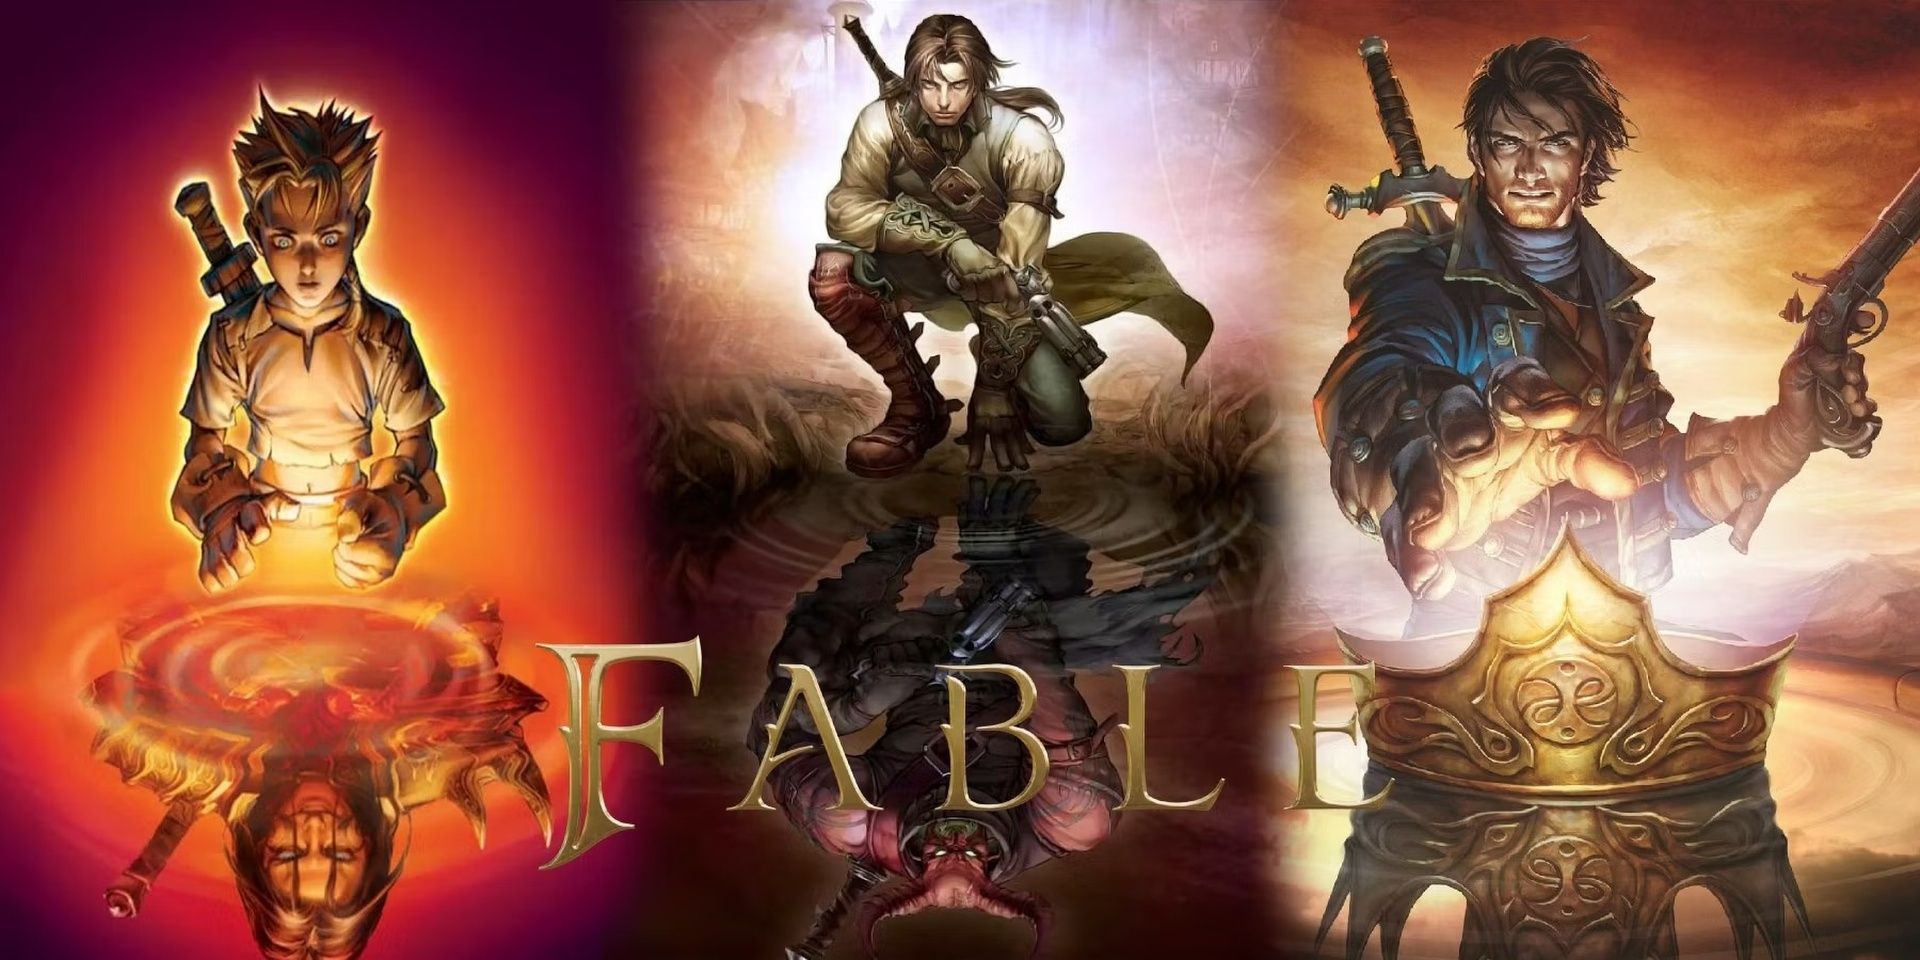 Collage of all three Fable games